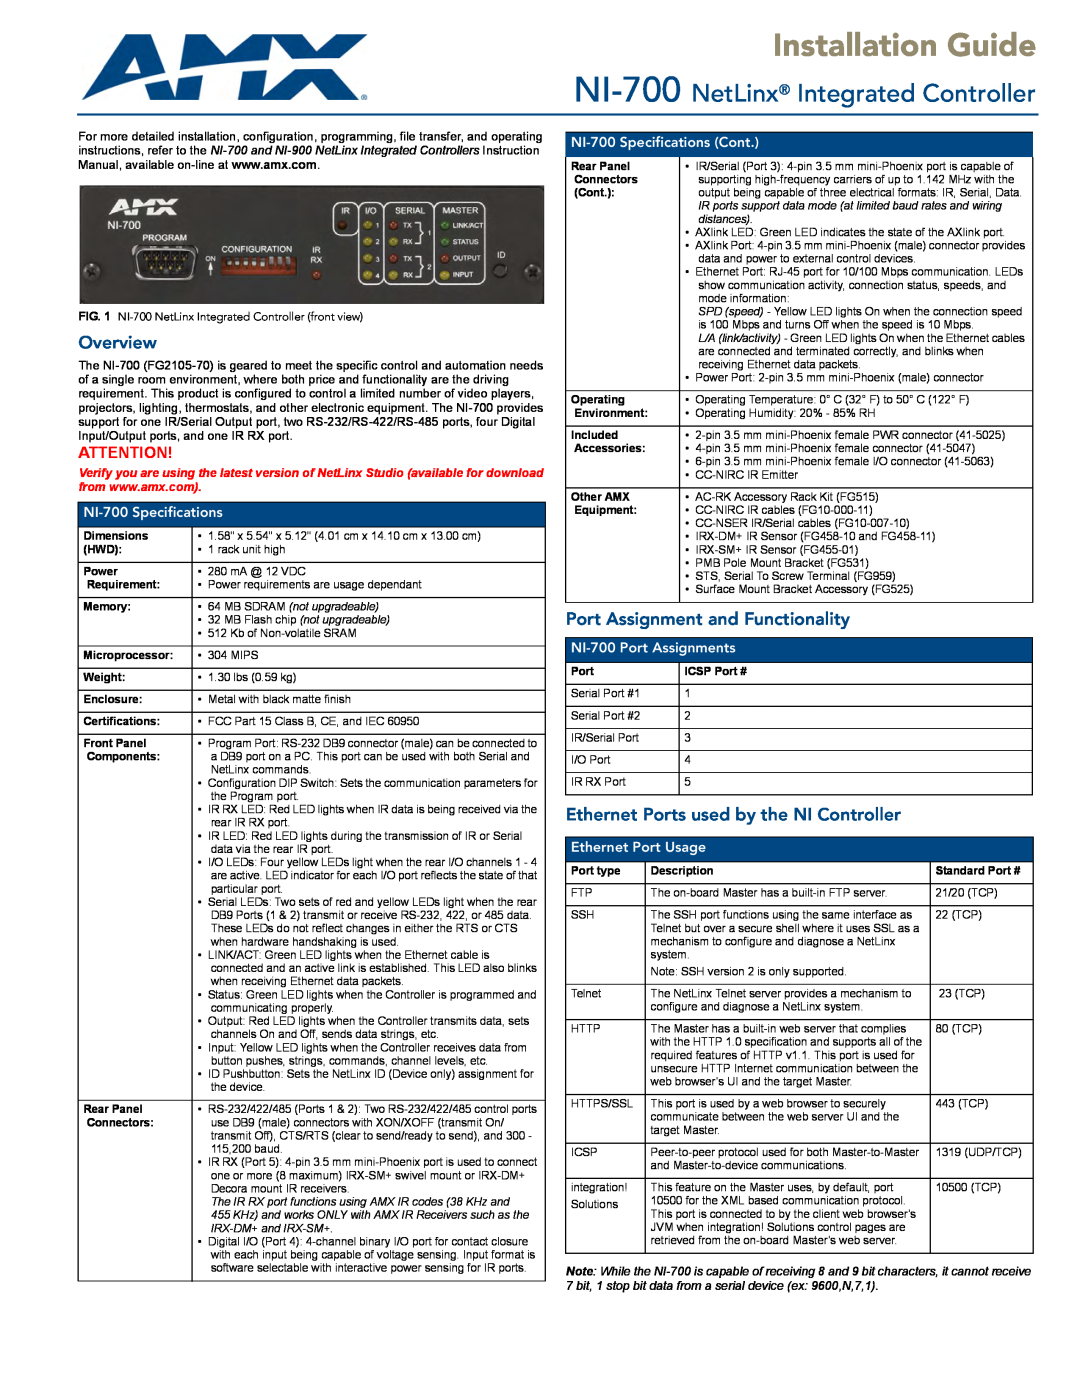 AMX NI-700 quick start Overview, Port Assignment and Functionality, Ethernet Ports used by the NI Controller, front rear 